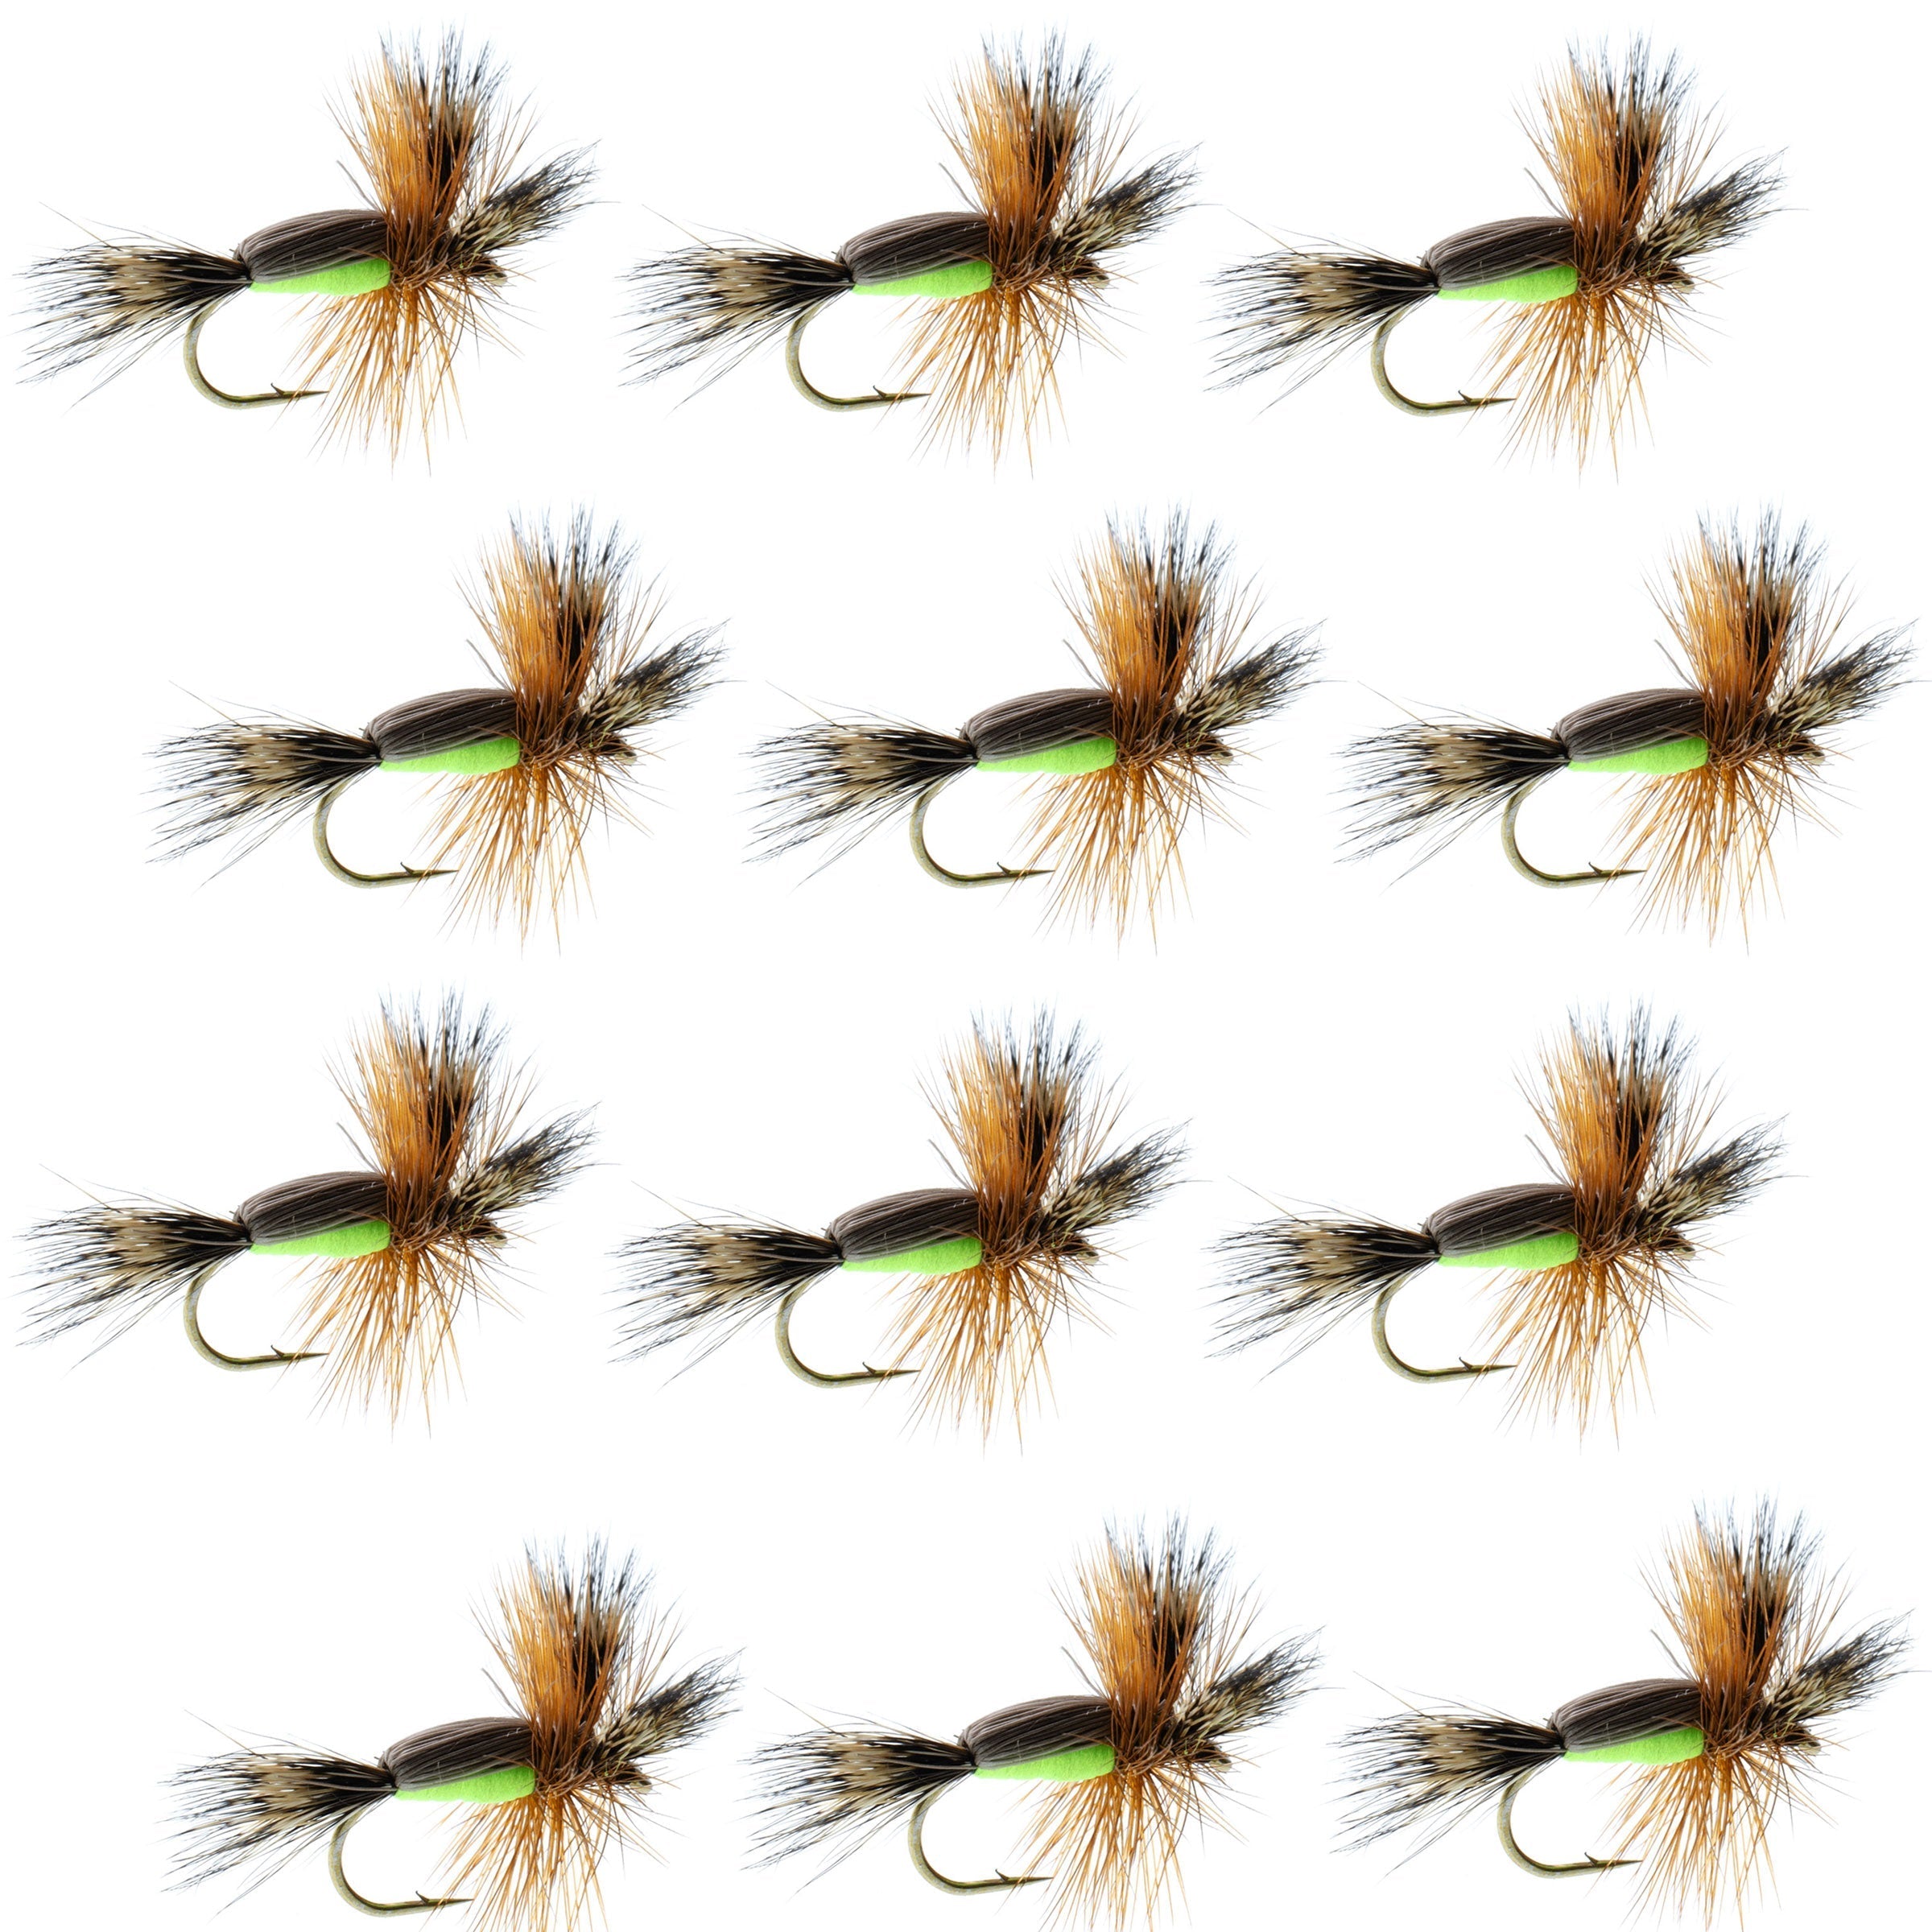 Chartreuse Humpy Classic Hair Wing Dry Fly - 1 docena de anzuelos para moscas, tamaño 14